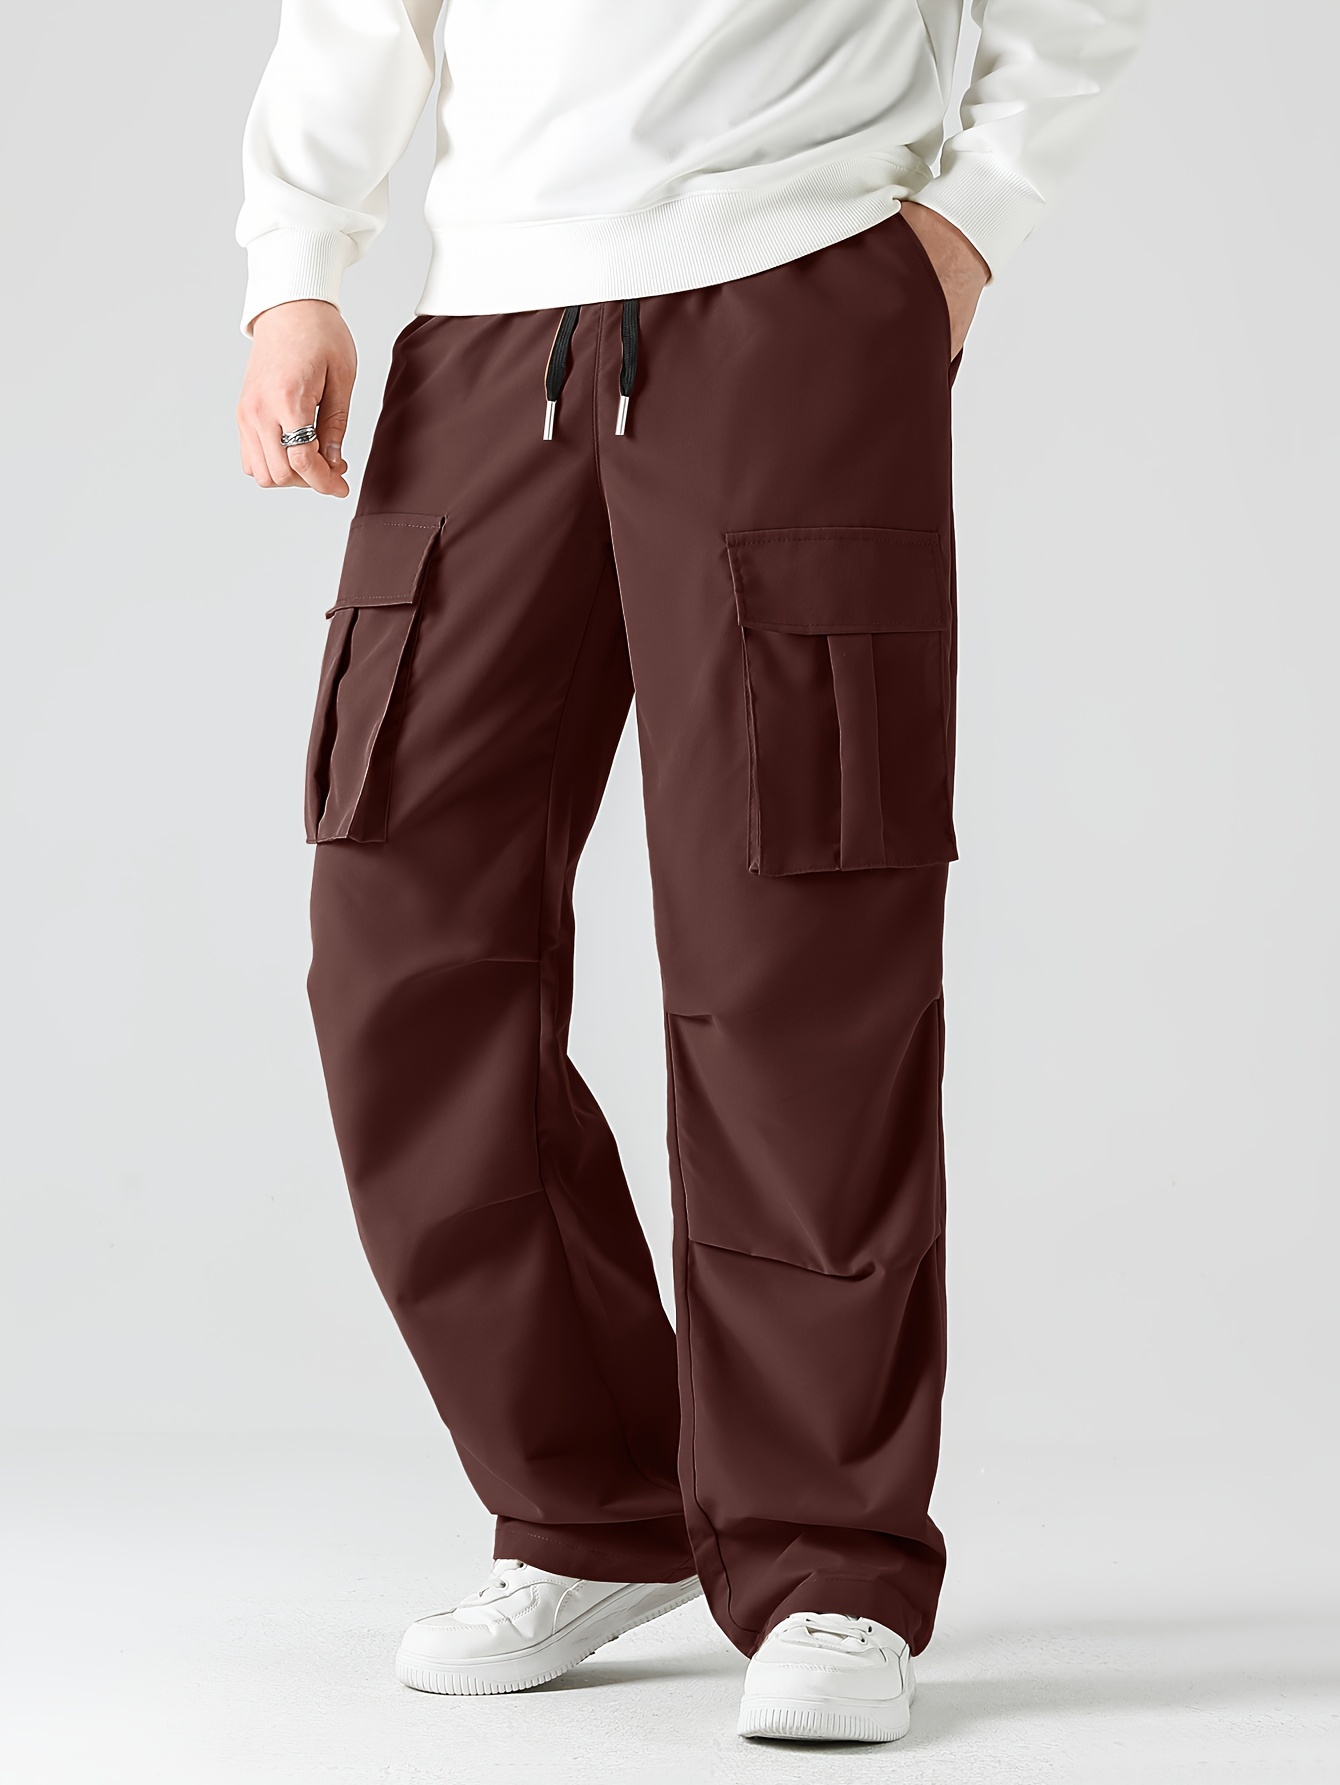 Plus Size Cargo Lounge Pants for Women Spring And Summer New Solid